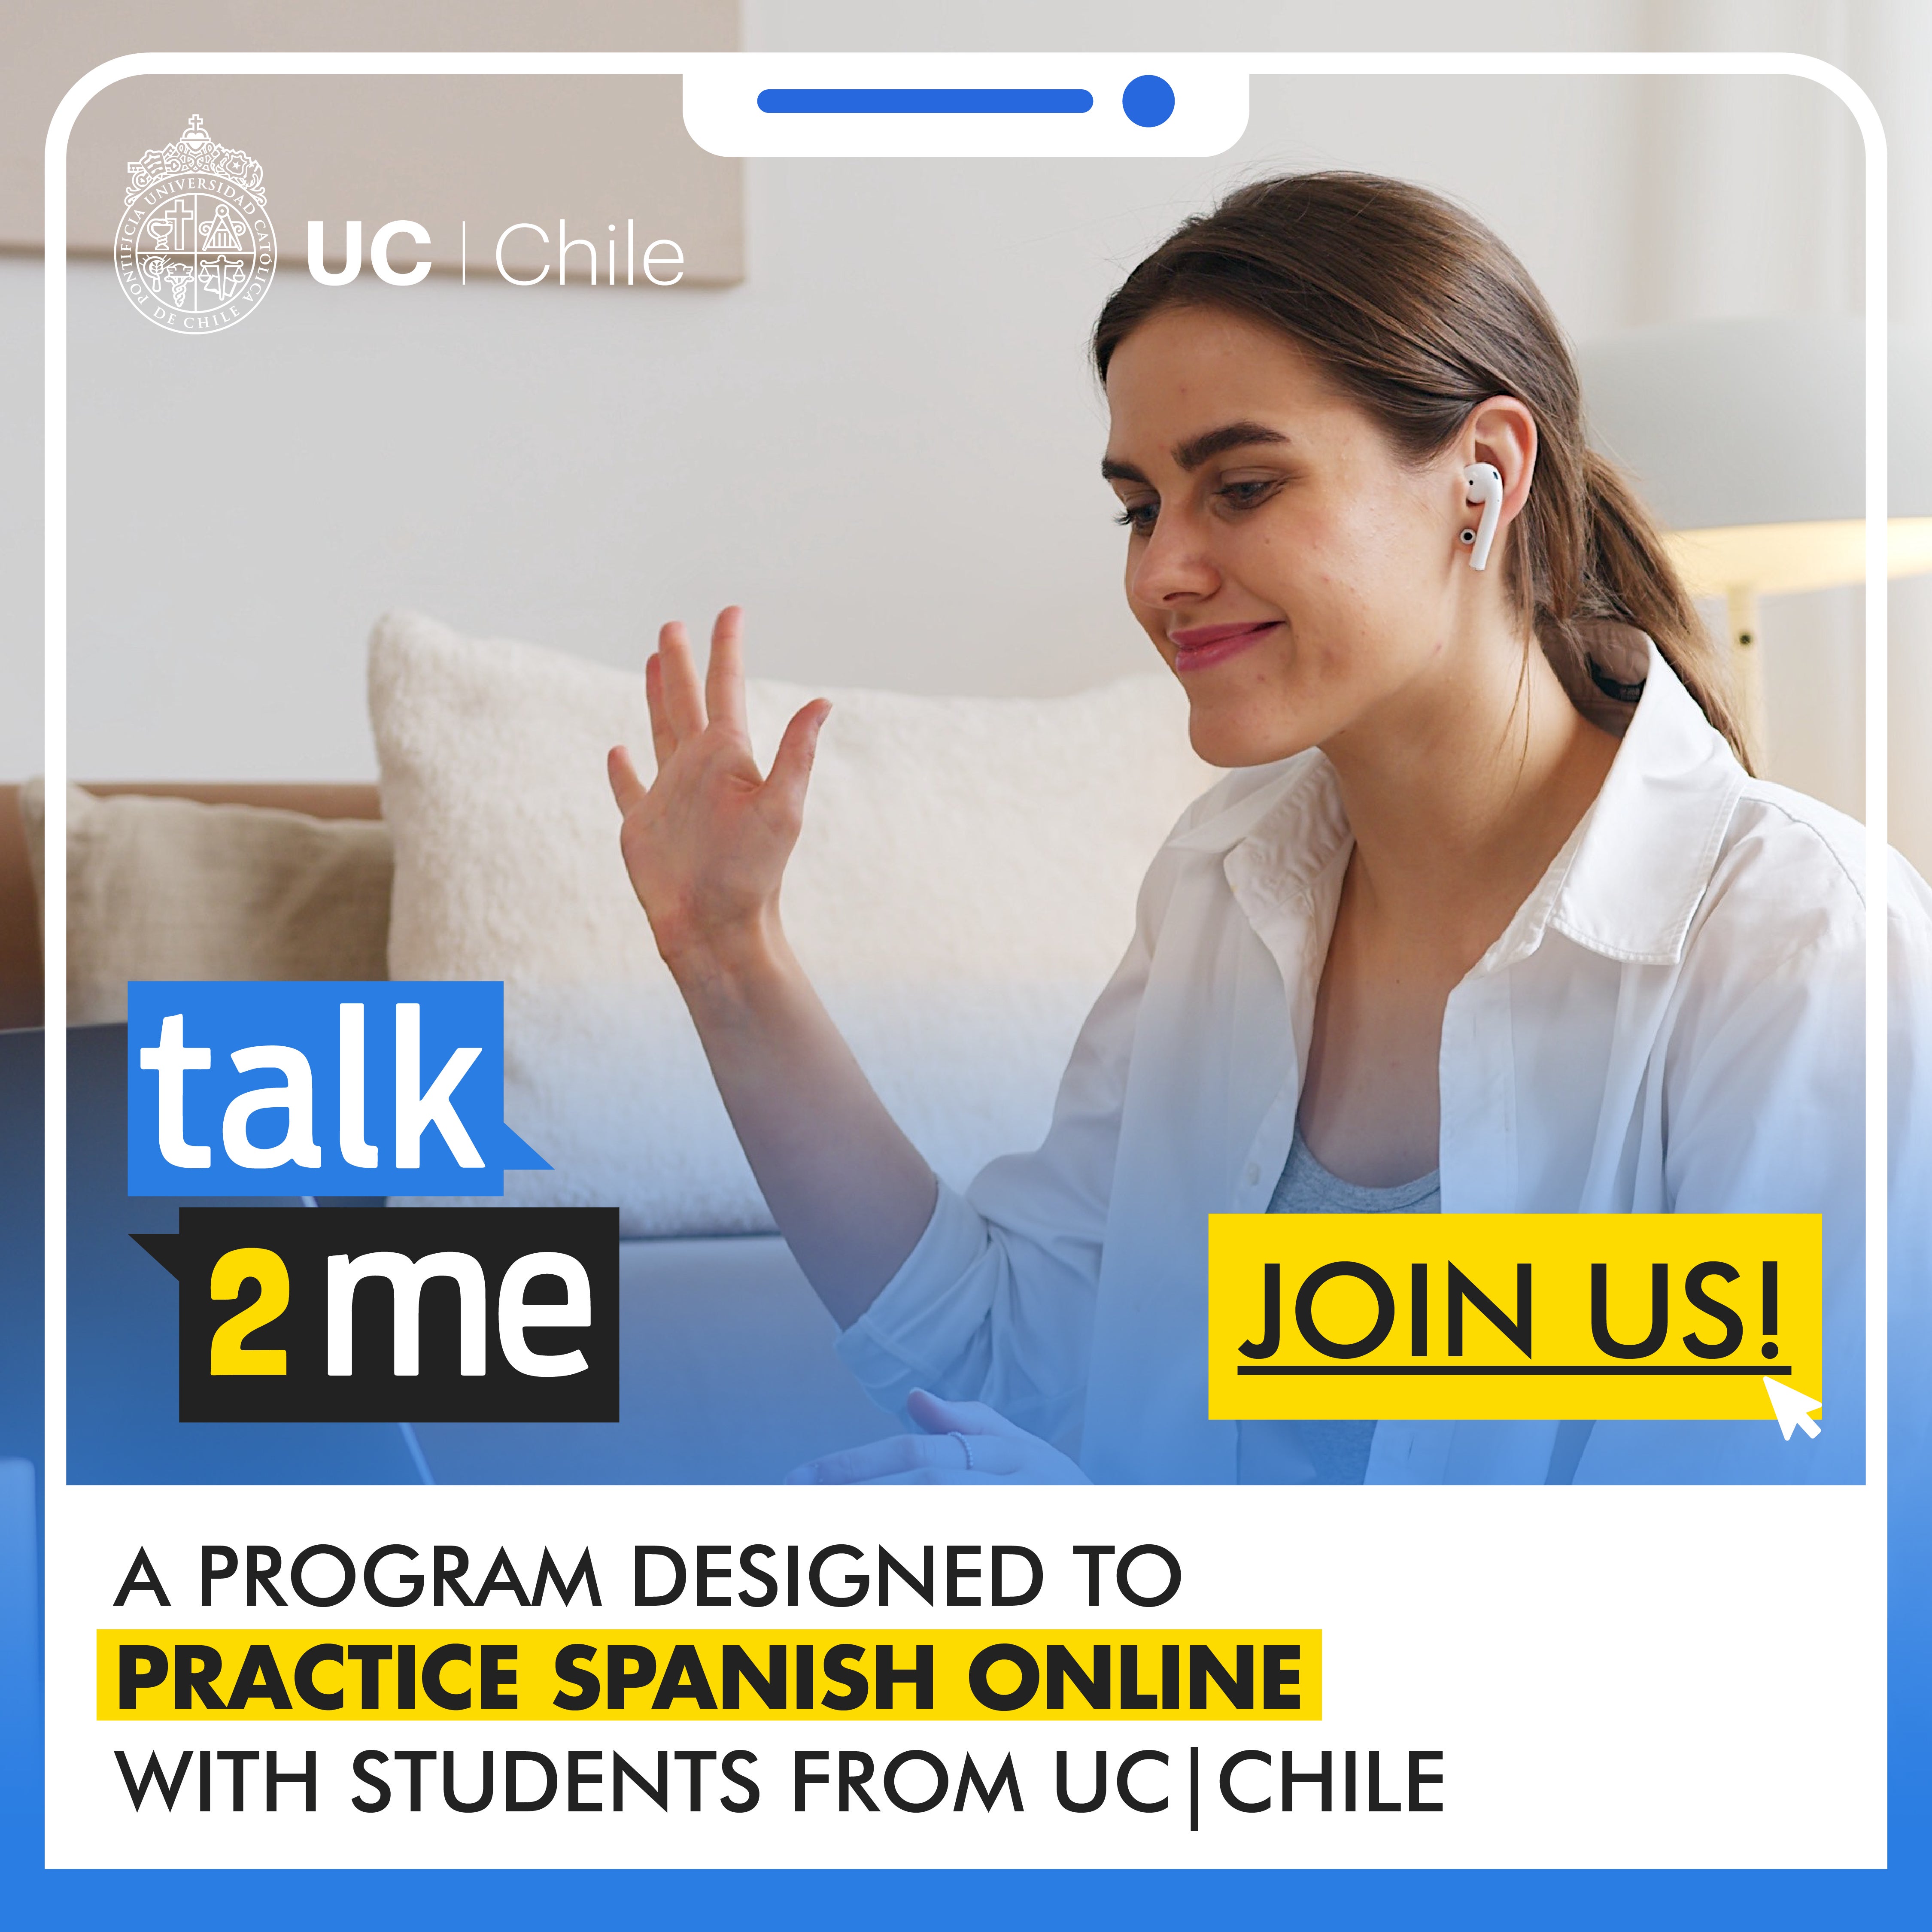 A student practicing Spanish with another student online, and the text "Talk2me" and "Join us!"